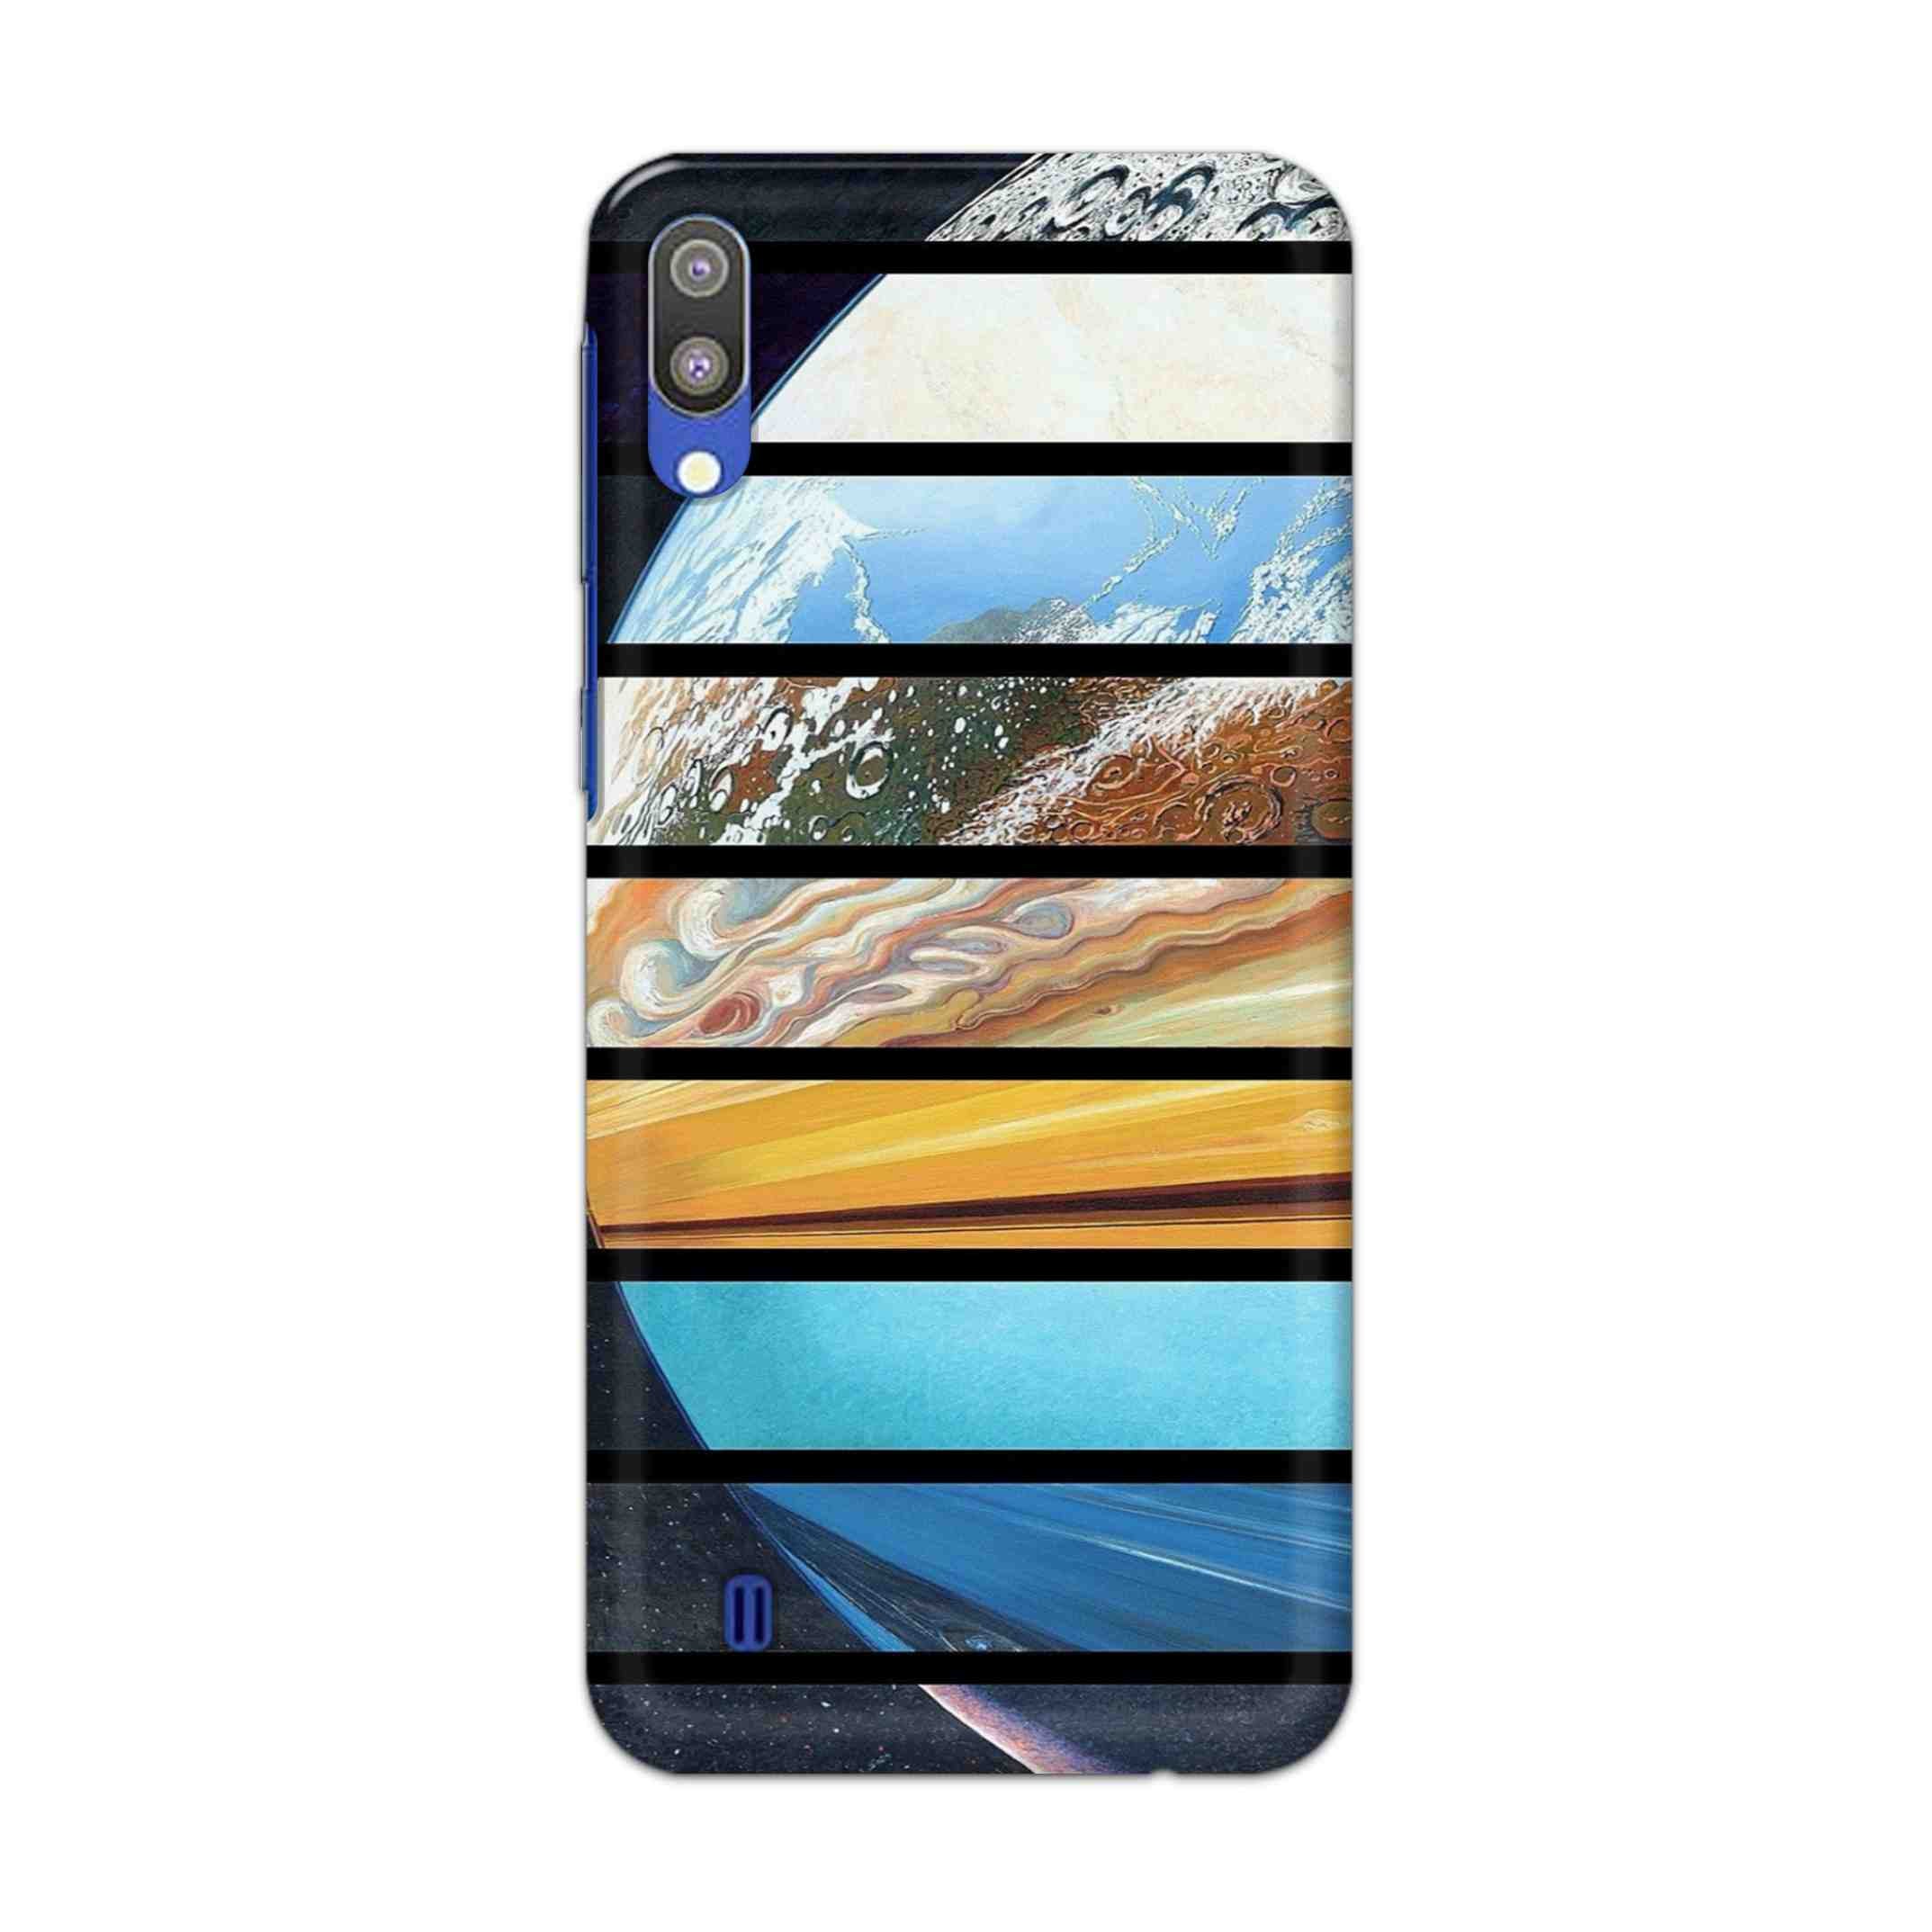 Buy Colourful Earth Hard Back Mobile Phone Case Cover For Samsung Galaxy M10 Online